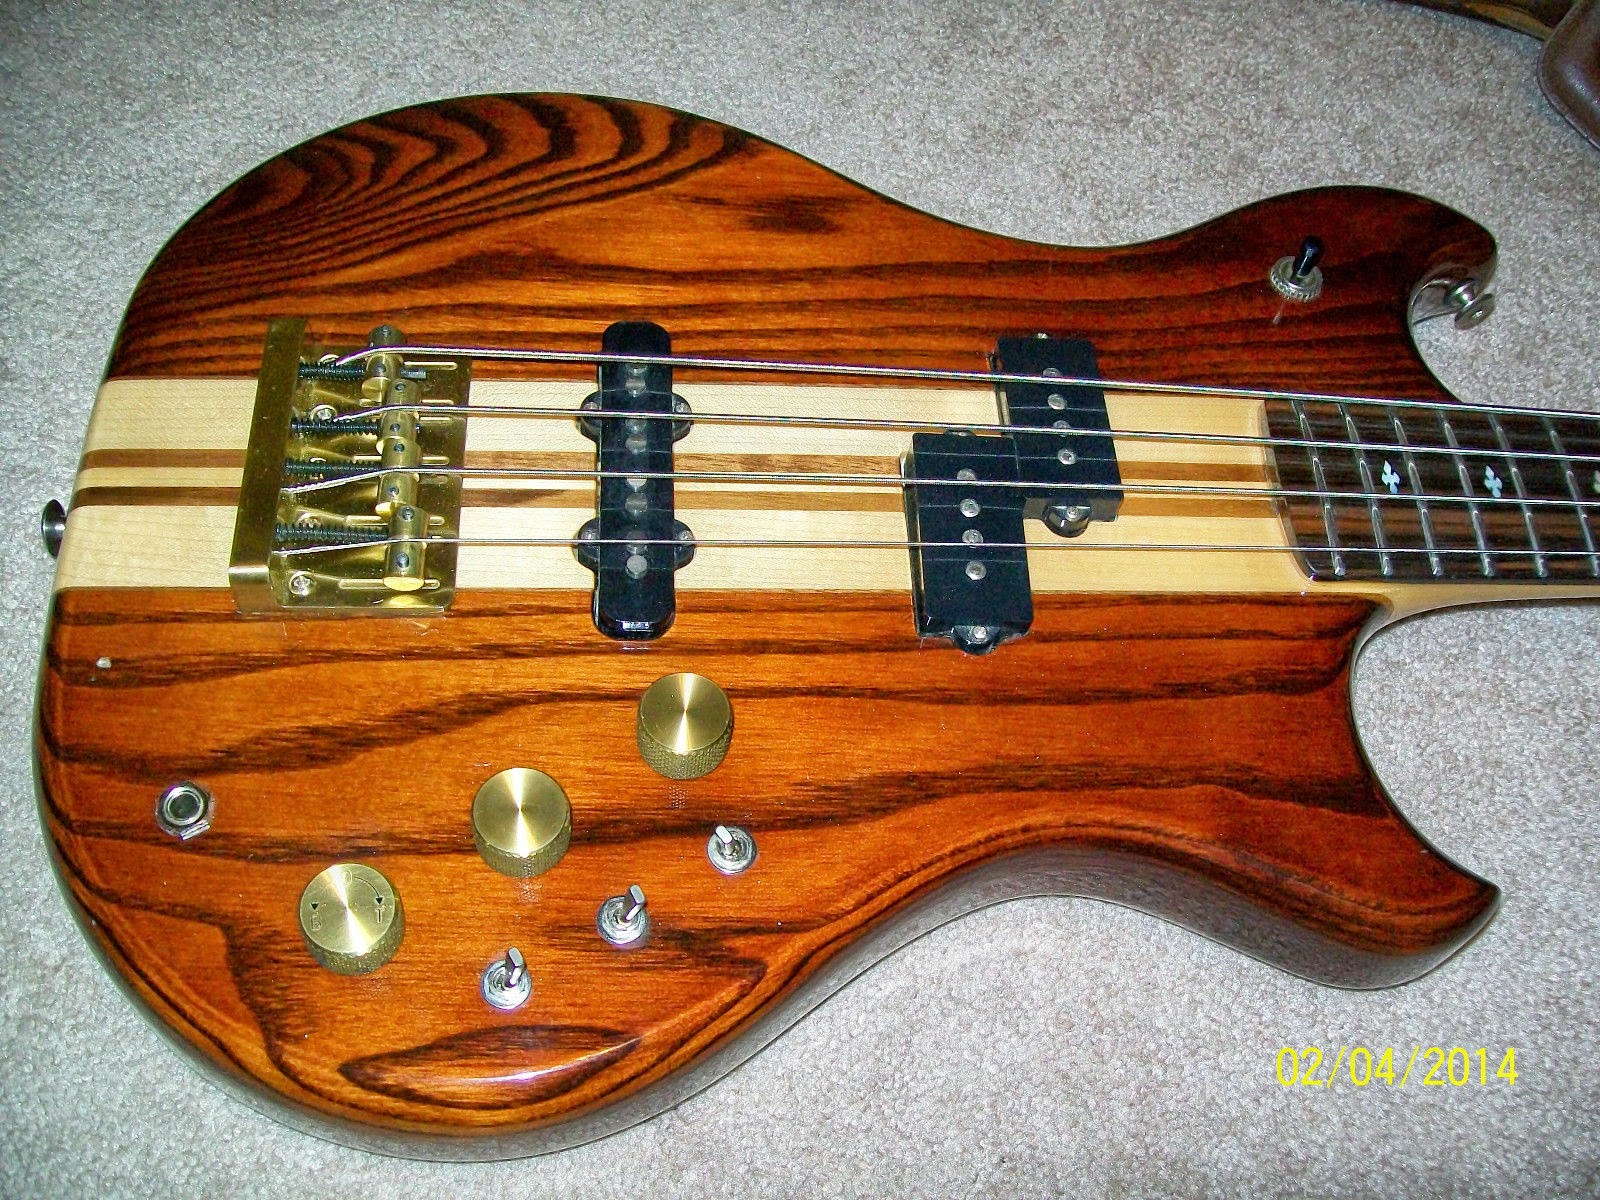 I have had a decades-long love for vintage Japanese guitars and basses sinc...